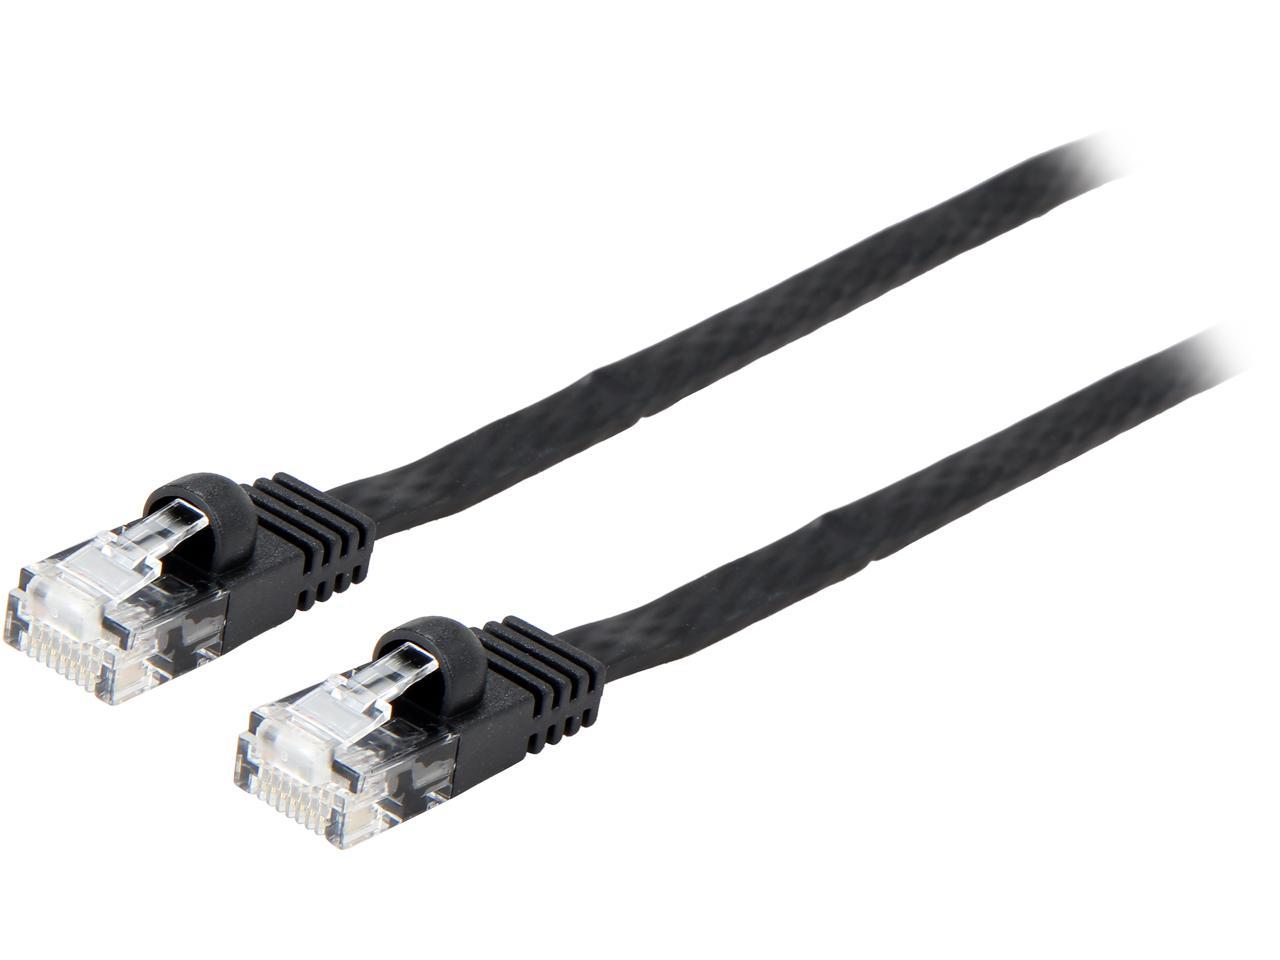 Rosewill RCNC18006 50 ft. Cat 6 Flat Cable with Cable Clips